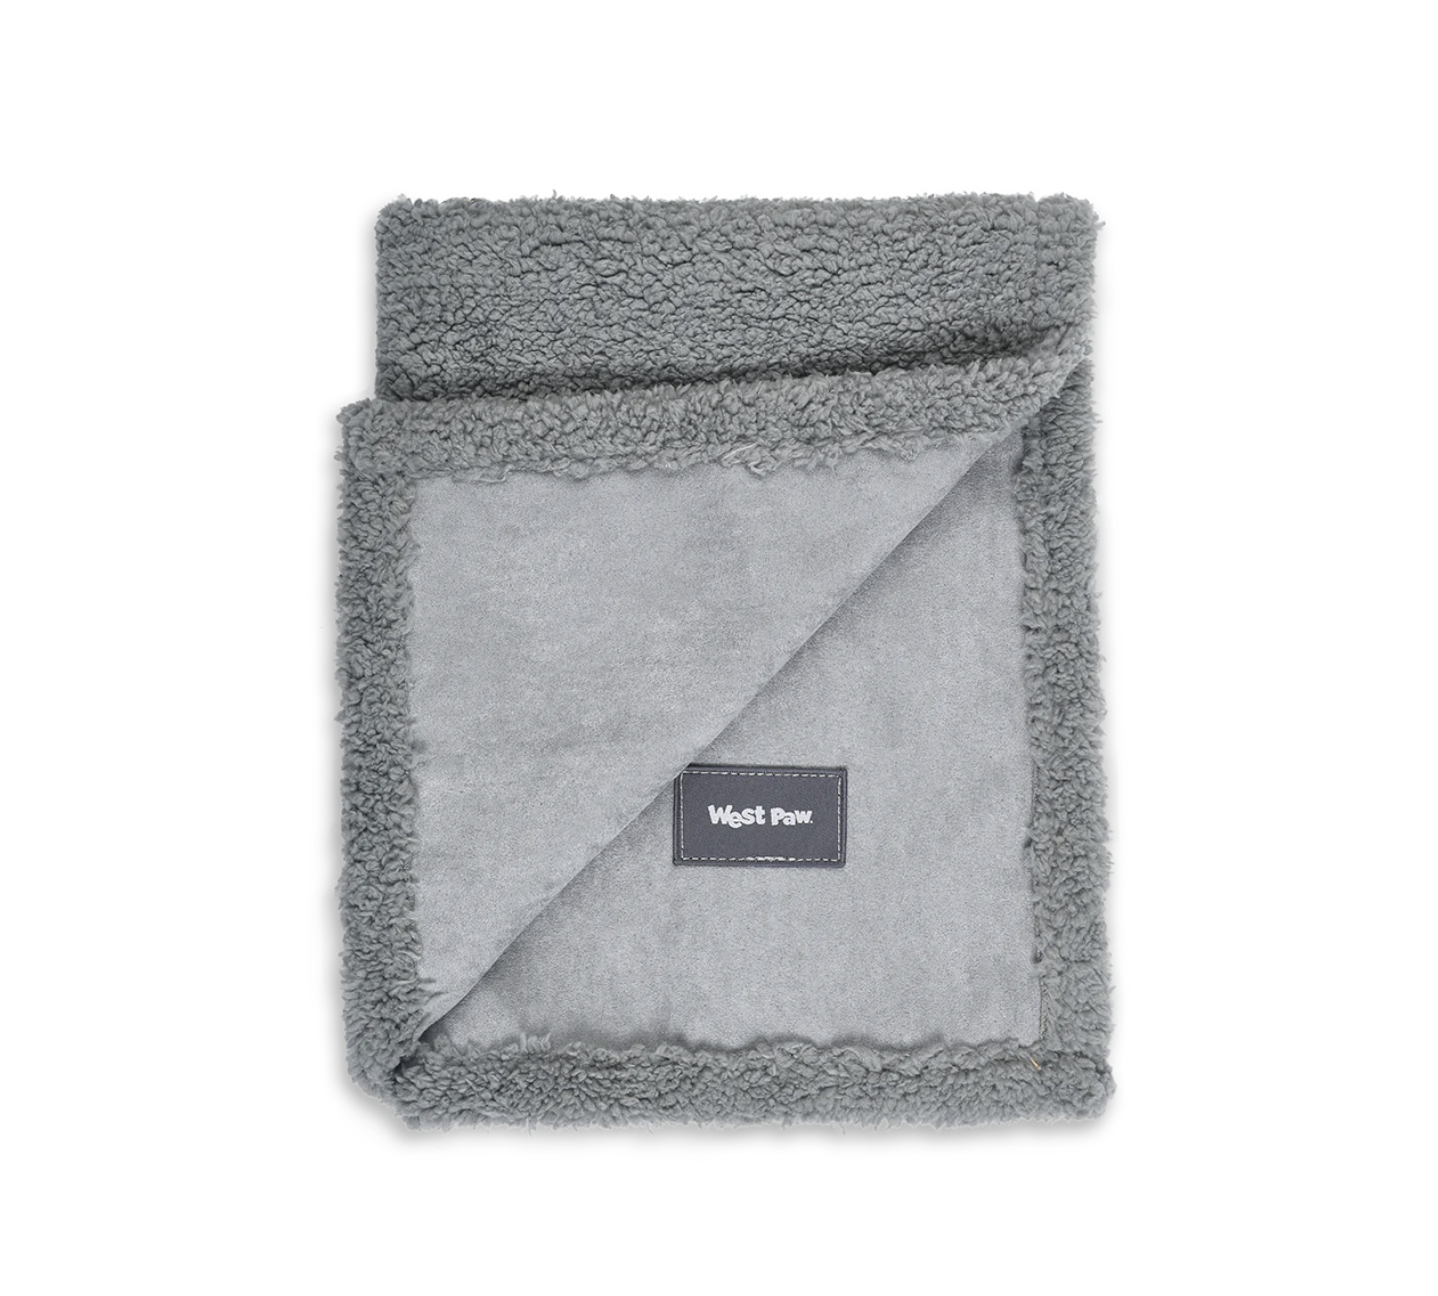 West Paw Eco-friendly Pet Blanket review and promo code